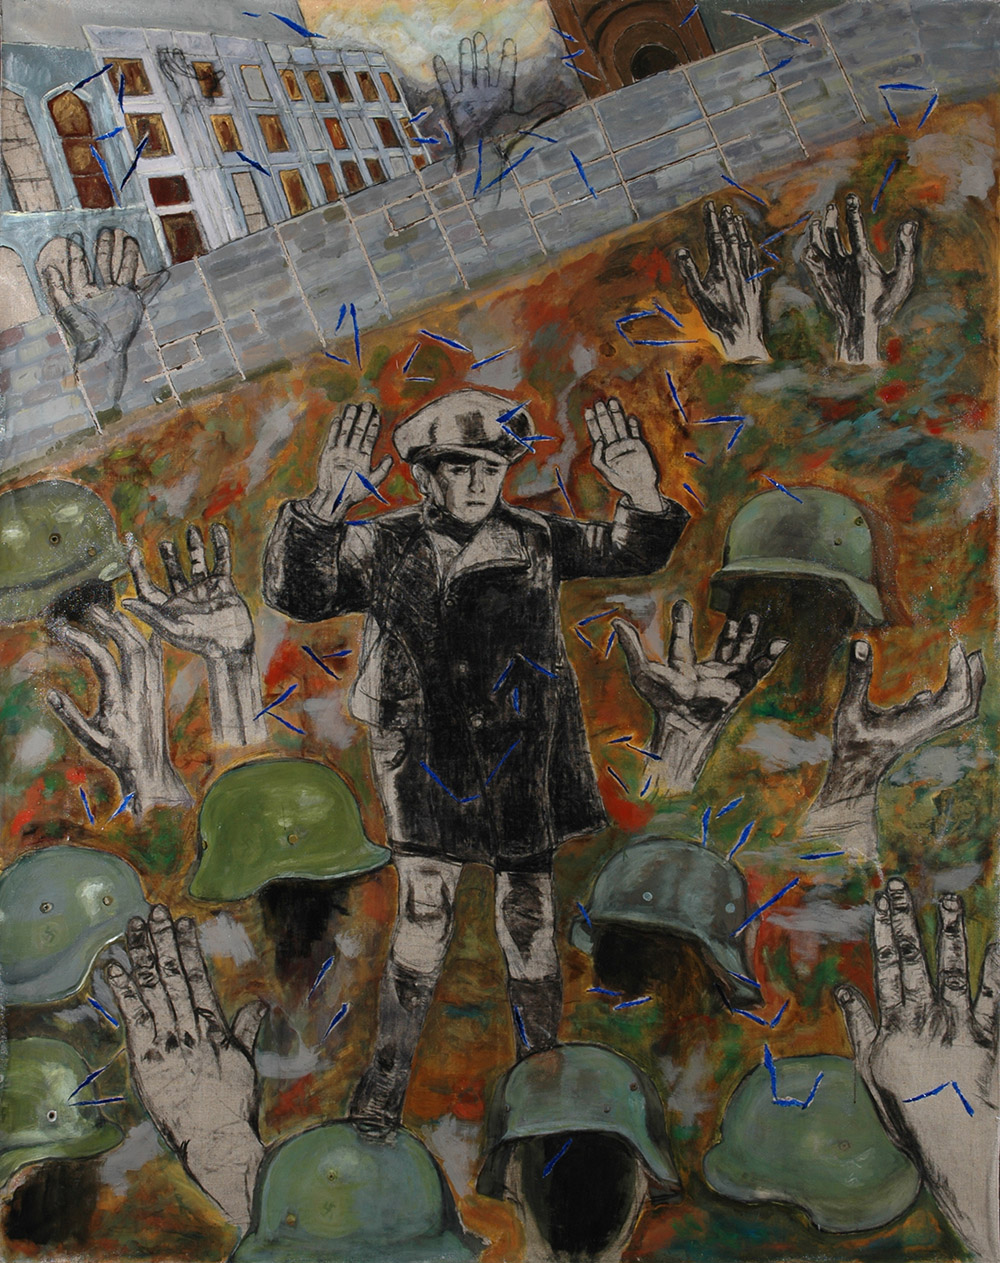 4.-Ono-Warsaw-Ghetto-Uprising-Victoire-d’Une-Defaite-2009.-Charcoal-and-acrylic-on-canvas-2-x-1.49-m-x.jpg